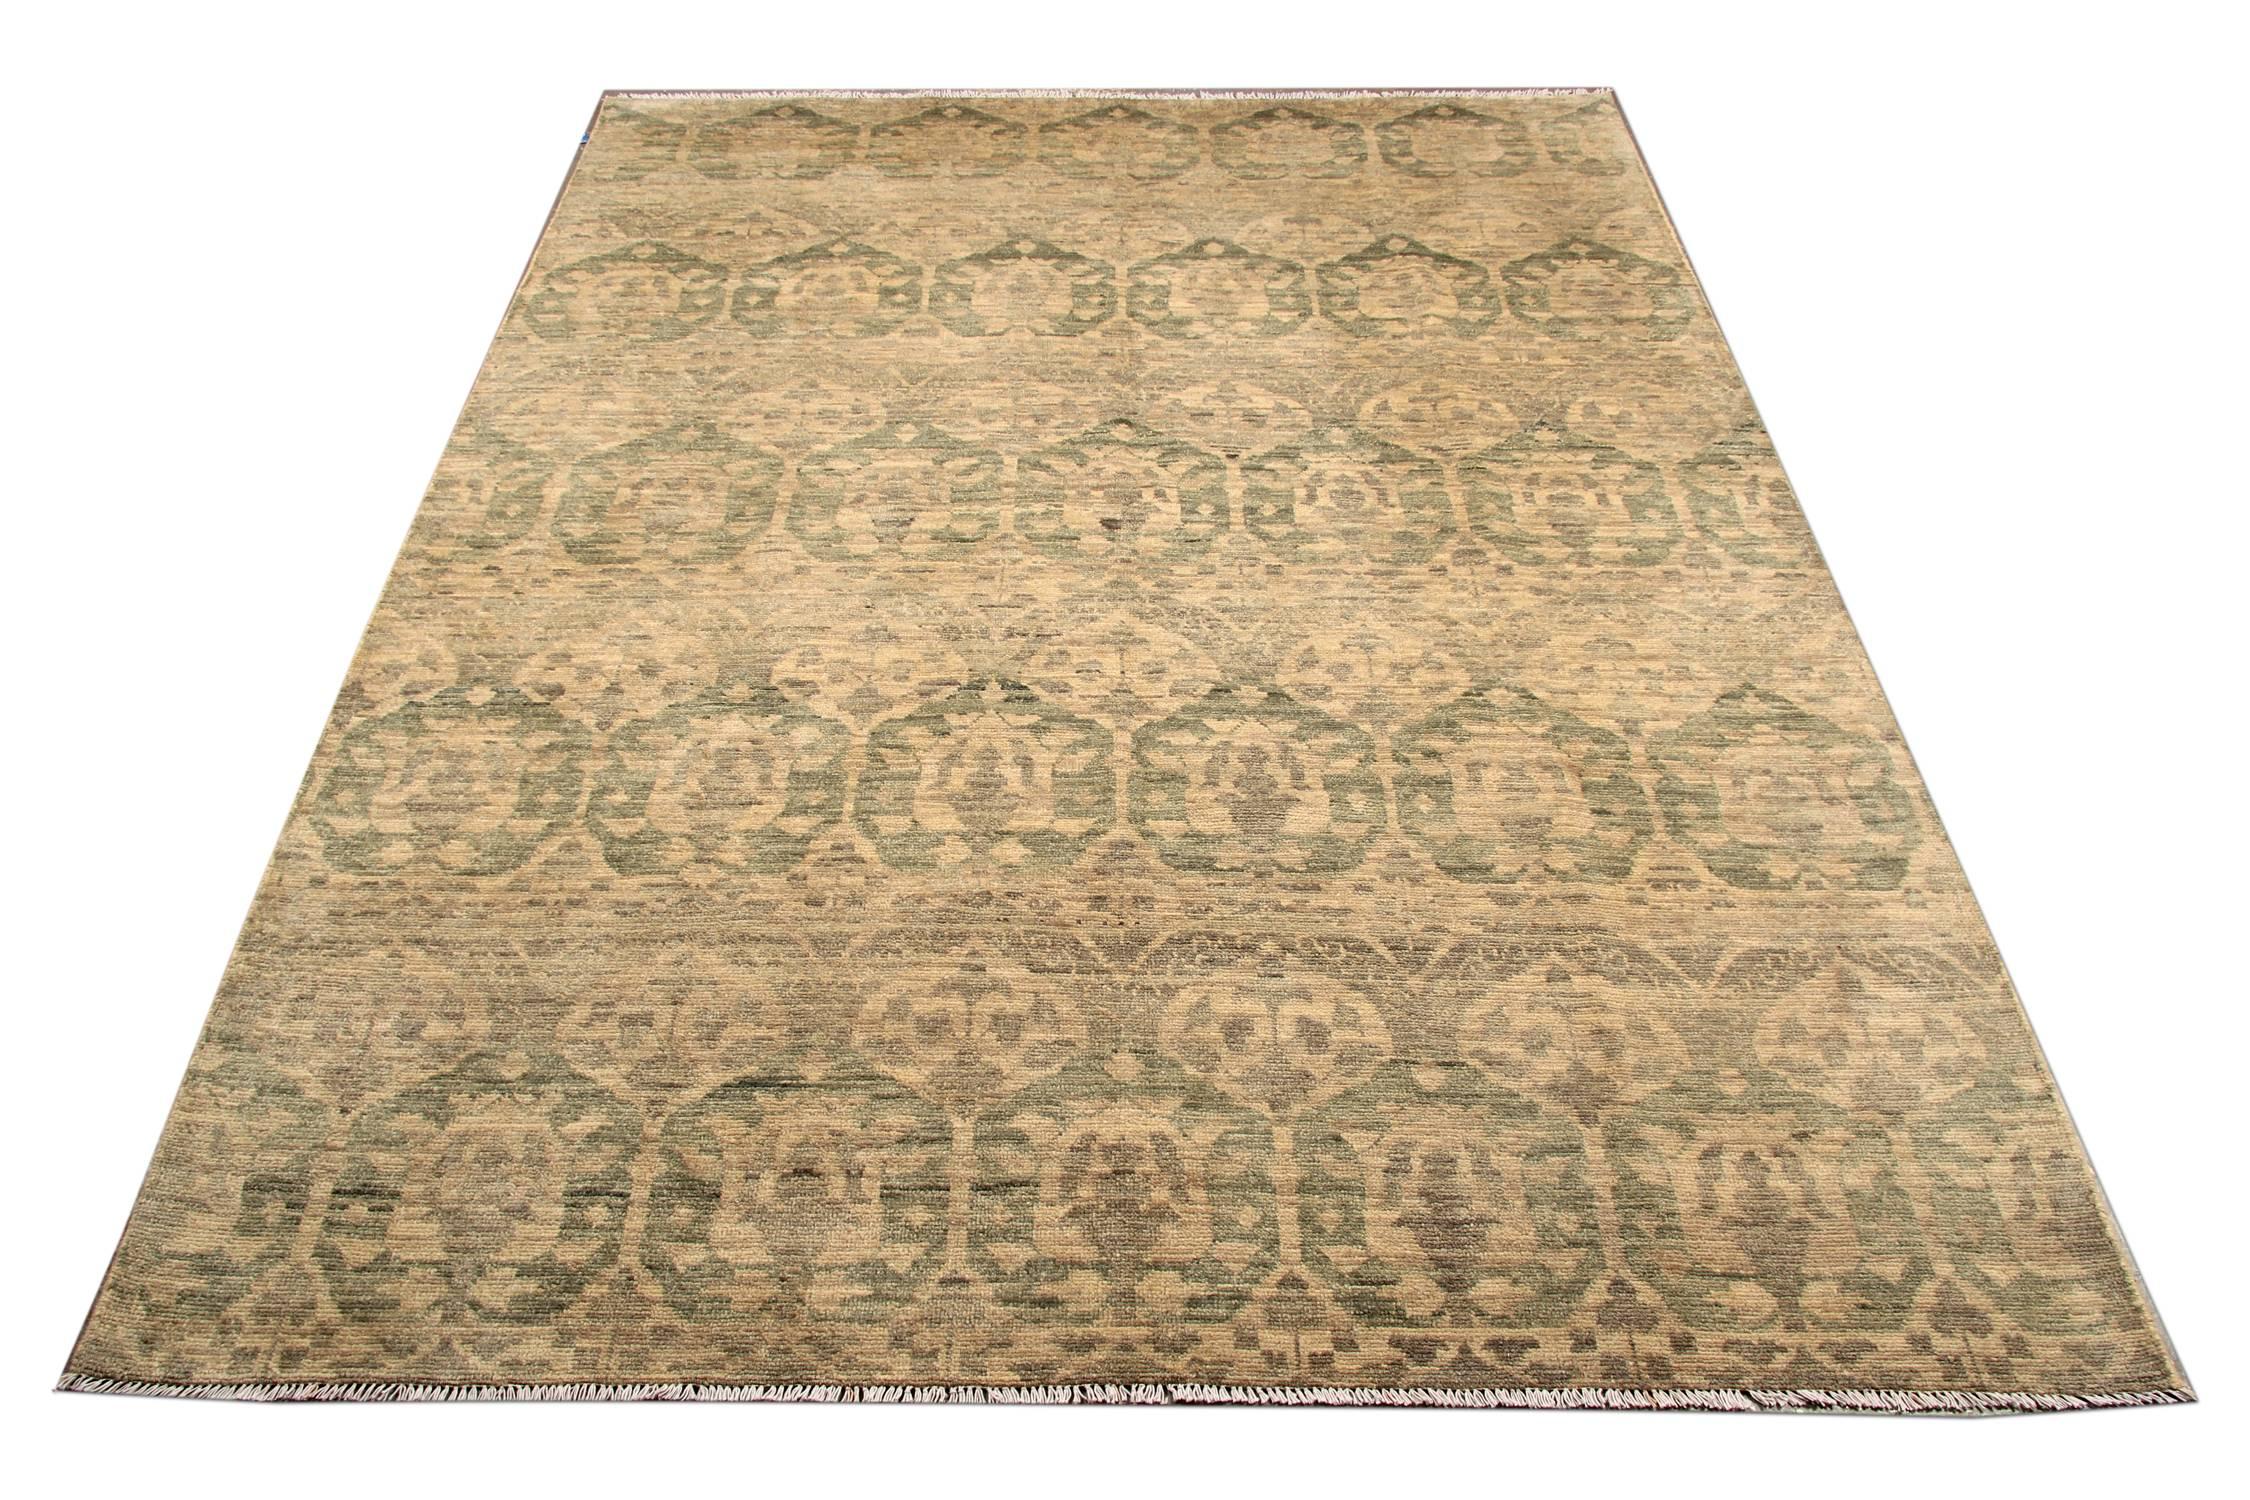 This handmade carpet oriental rug has an inherently sophisticated quality, from adding texture to monochromatic interiors to keeping the overall design scheme controlled instead of wild. A transitional Khaki- Gray rug like this one has the power to